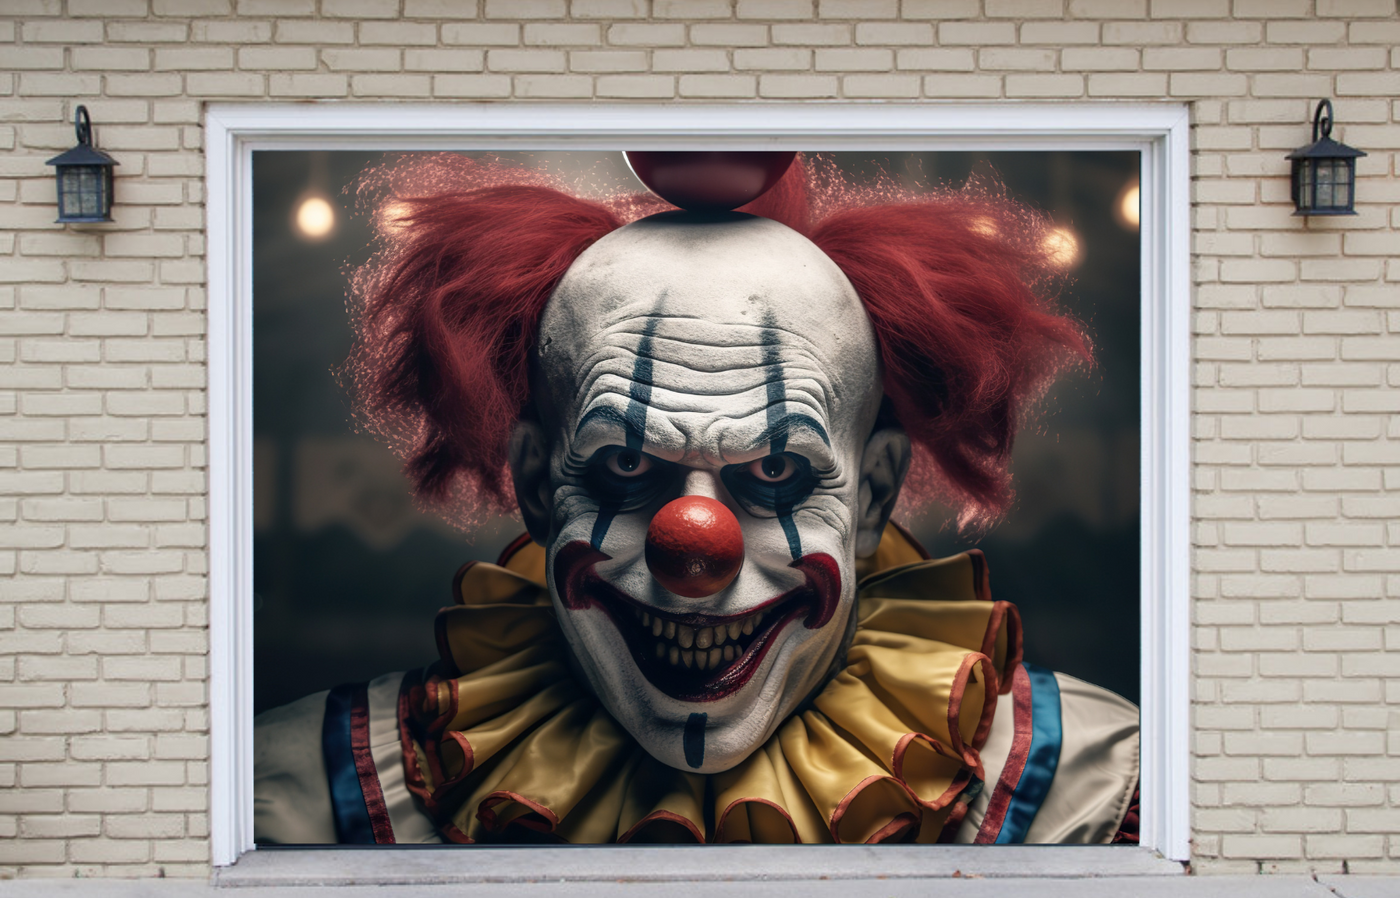 Evil Clown Portrait Of Scary Spooky Clown Monster From Horror Movie Garage Door Cover Wrap Decoration